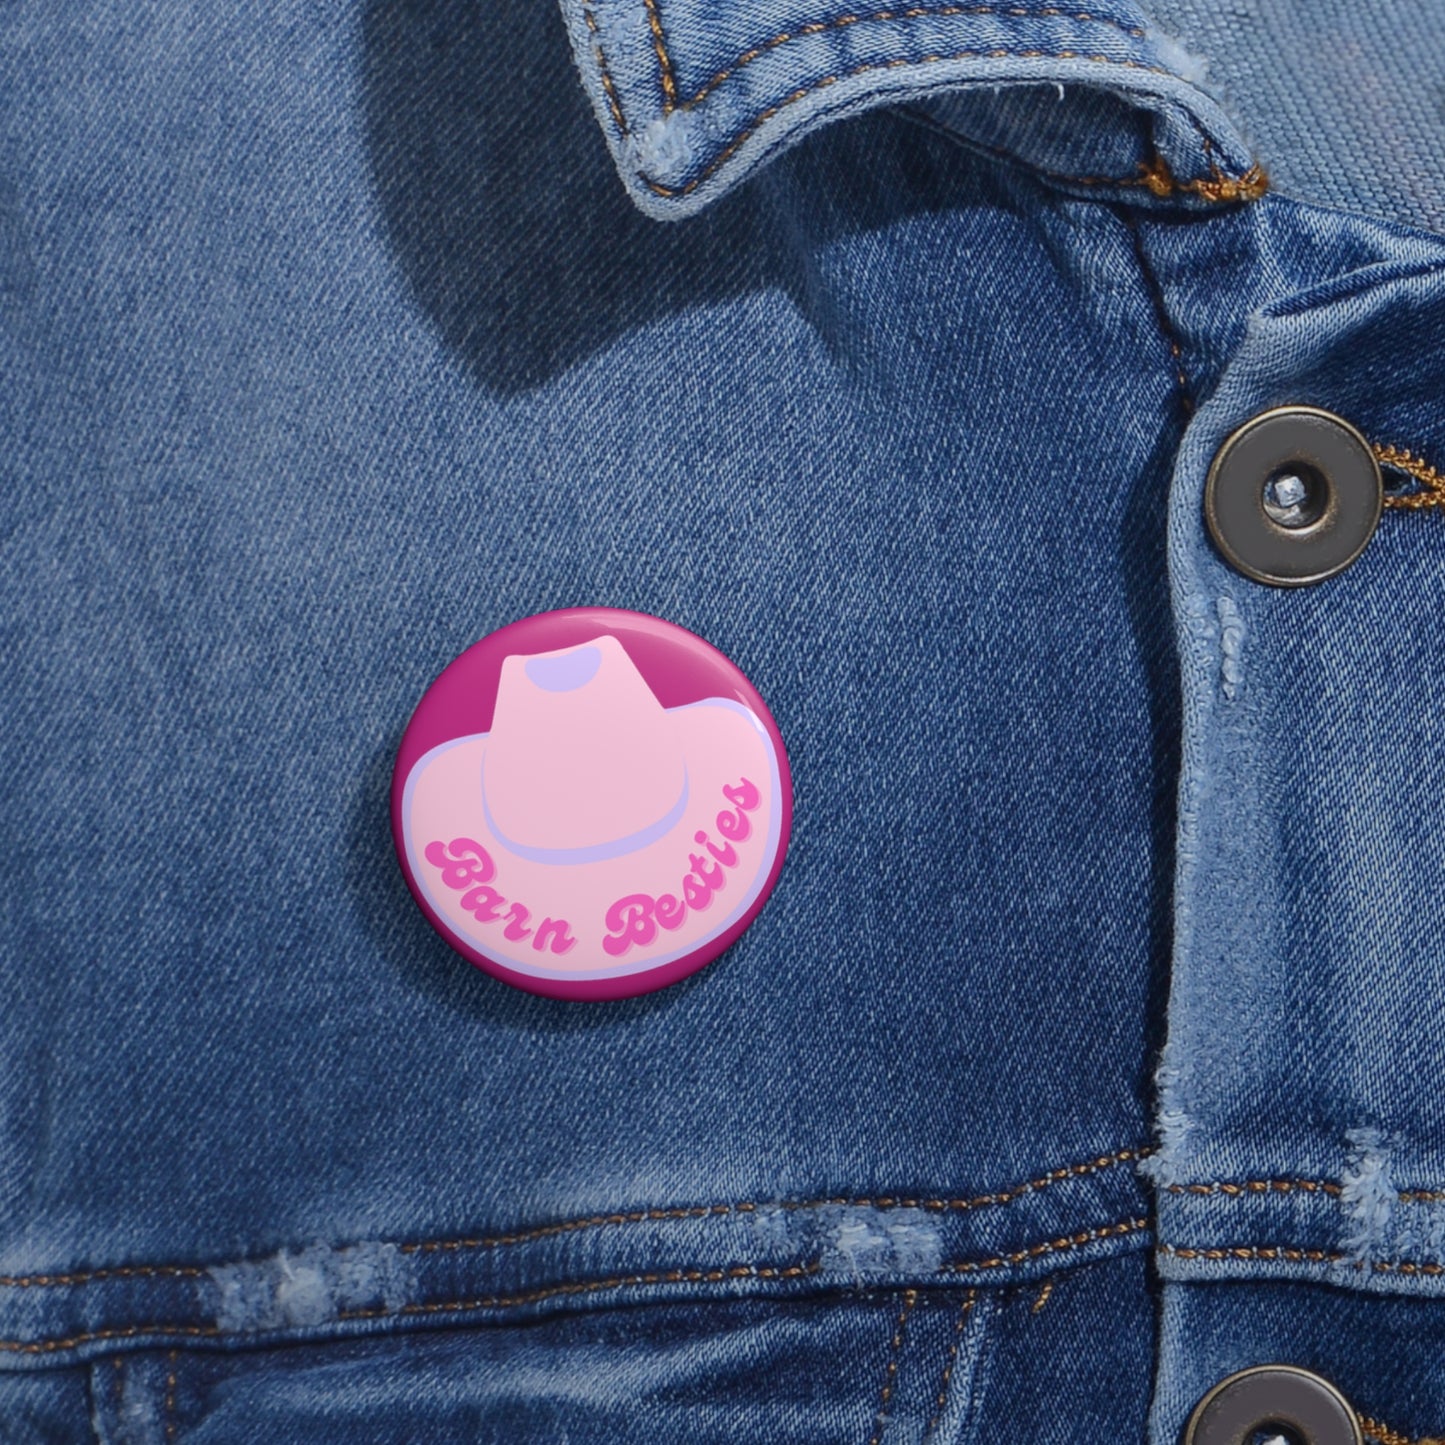  with The words barn Besties on the rim. Picture shows button pin on a Jean jacket